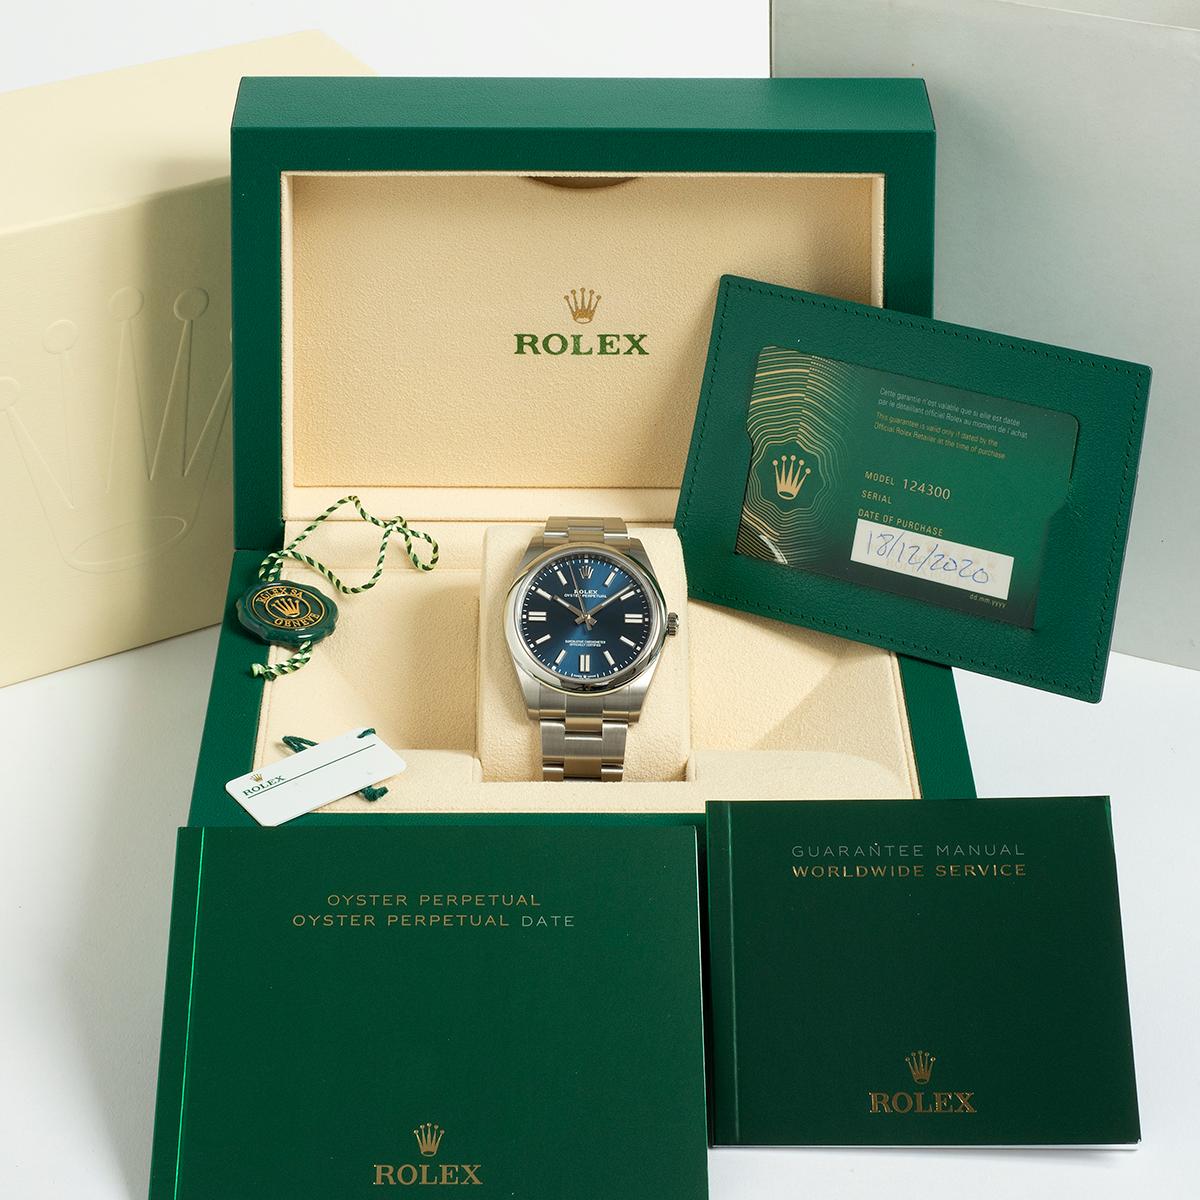 Our Rolex Oyster Perpetual with 41mm stainless steel case, reference 124300, features a blue dial and has been unworn (and with factory stickers intact) since it was purchased new in December 2020 , retailed by a recognised UK Rolex authorised